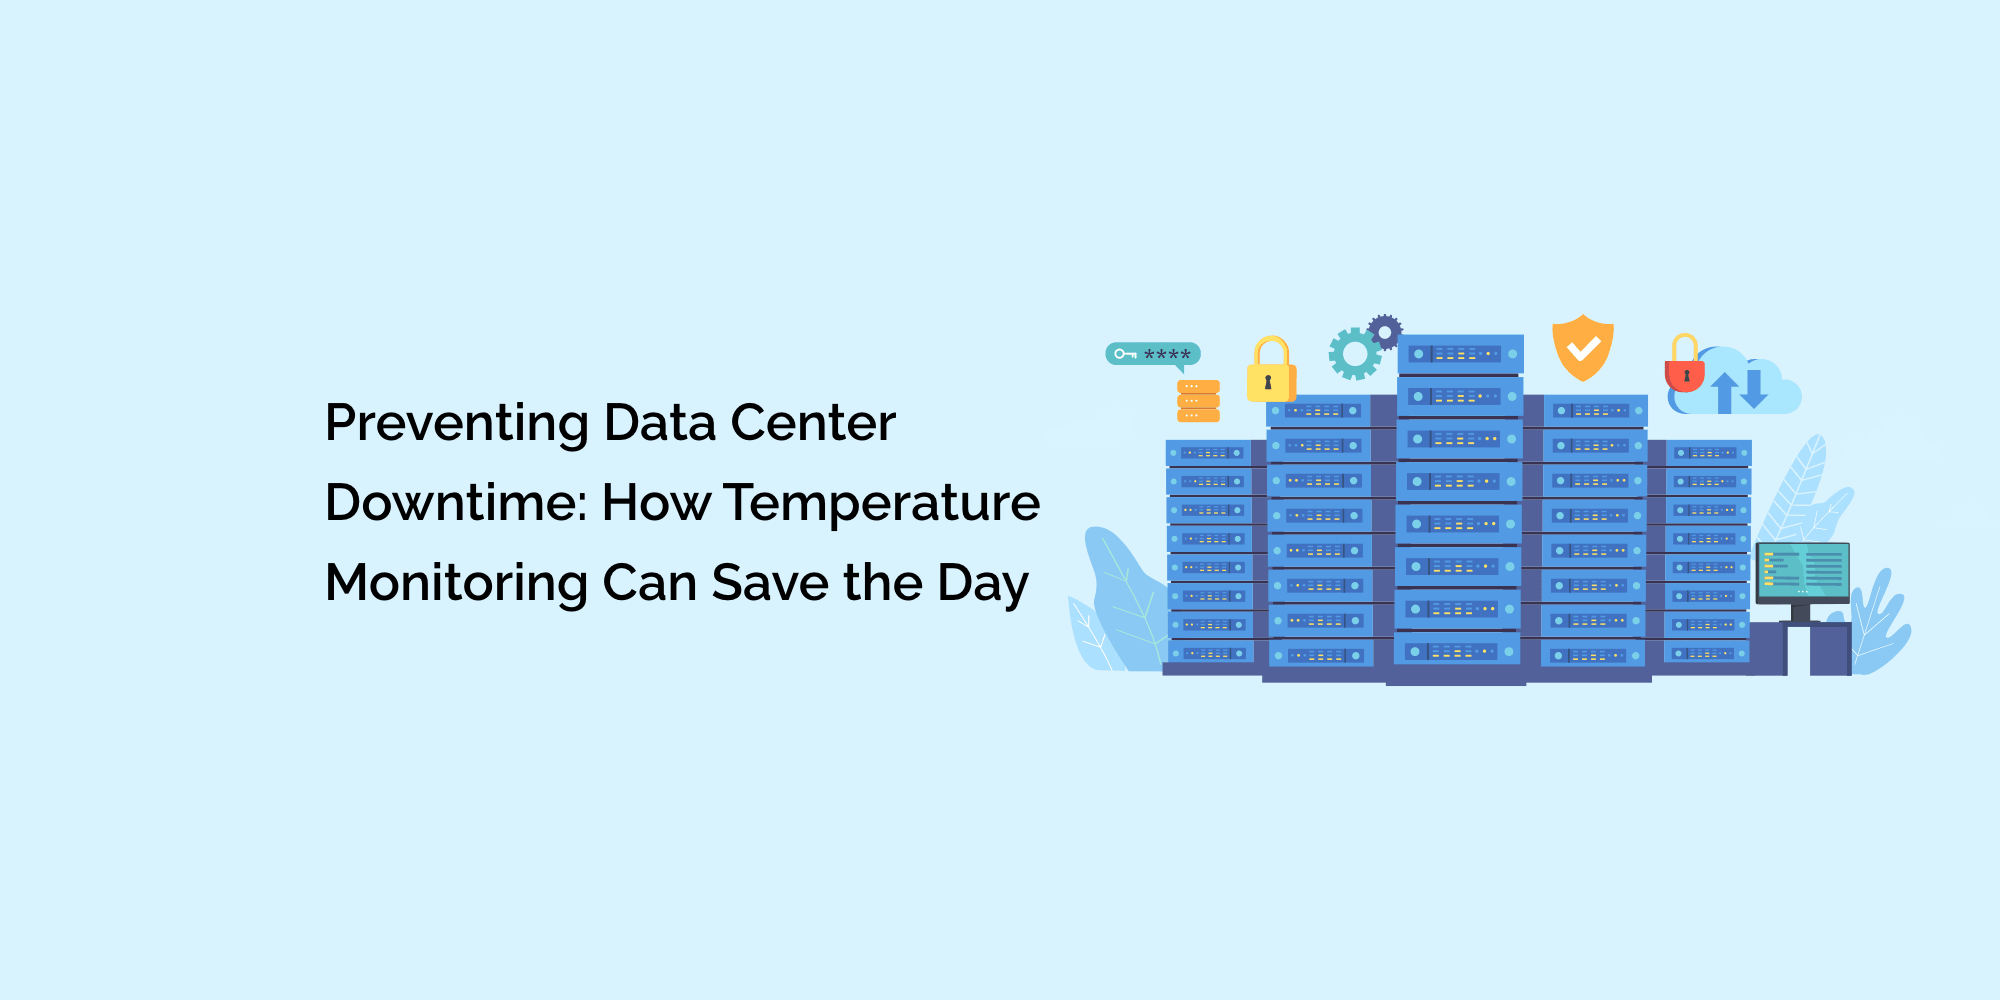 Preventing Data Center Downtime: How Temperature Monitoring Can Save the Day